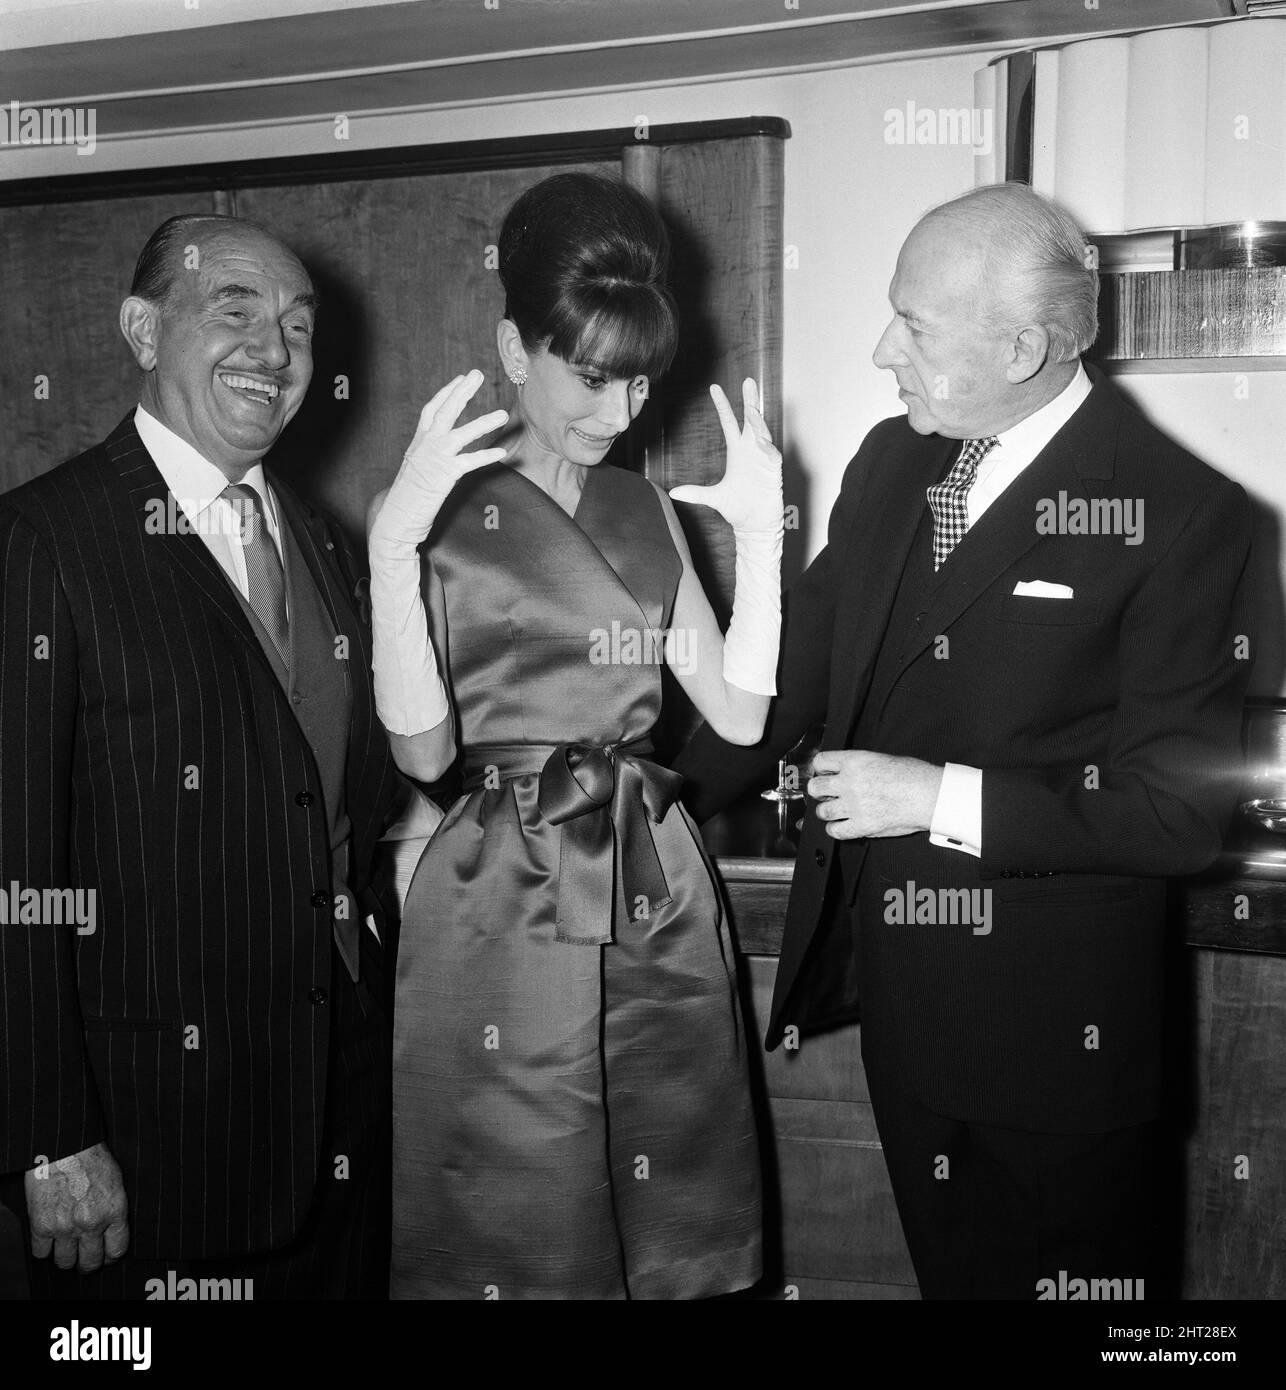 Actress Audrey Hepburn pictured with Jack L Warner (left) and Cecil Beaton at a press reception at the Savoy Hotel in London, held for some of the stars of the film 'My Fair Lady'. 19th January 1965. Stock Photo